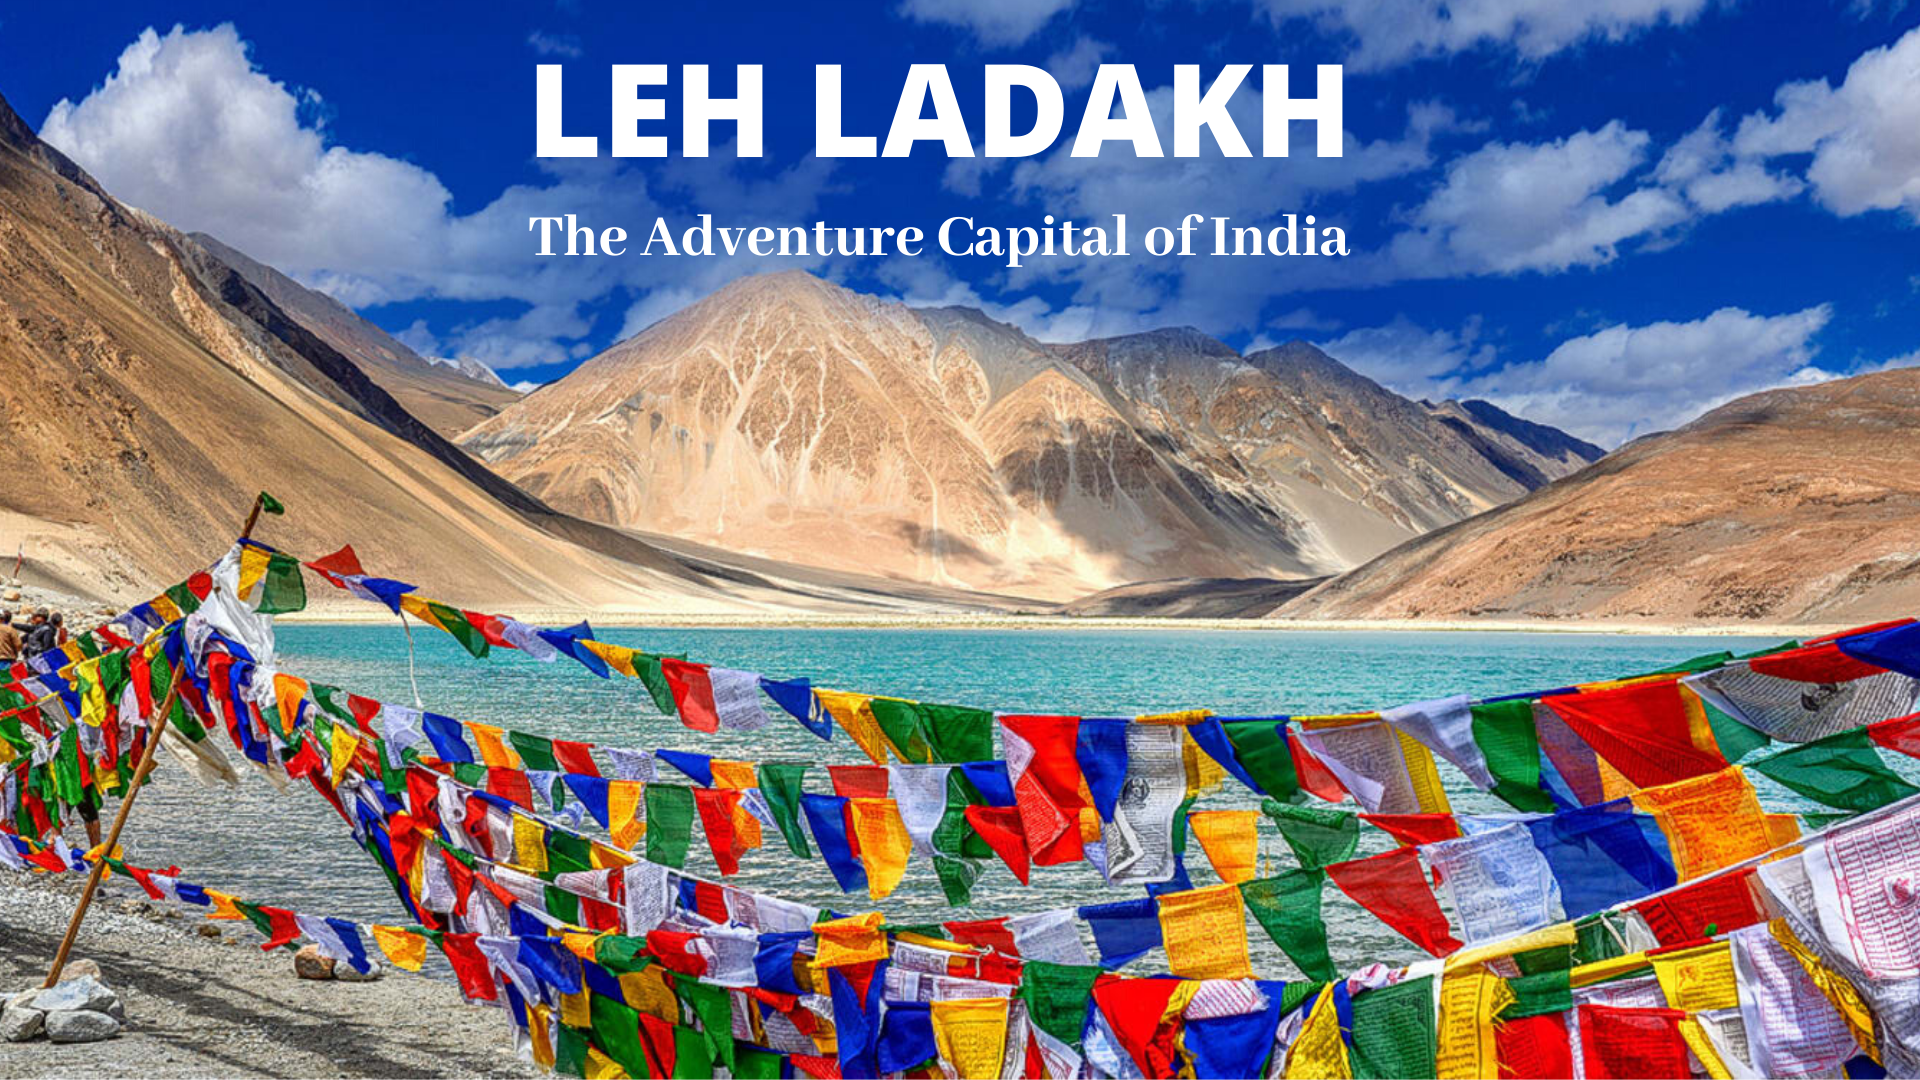 Leh Ladakh Wallpapers Wallpaper Cave You can also upload and share your favorite ladakh wallpapers. leh ladakh wallpapers wallpaper cave